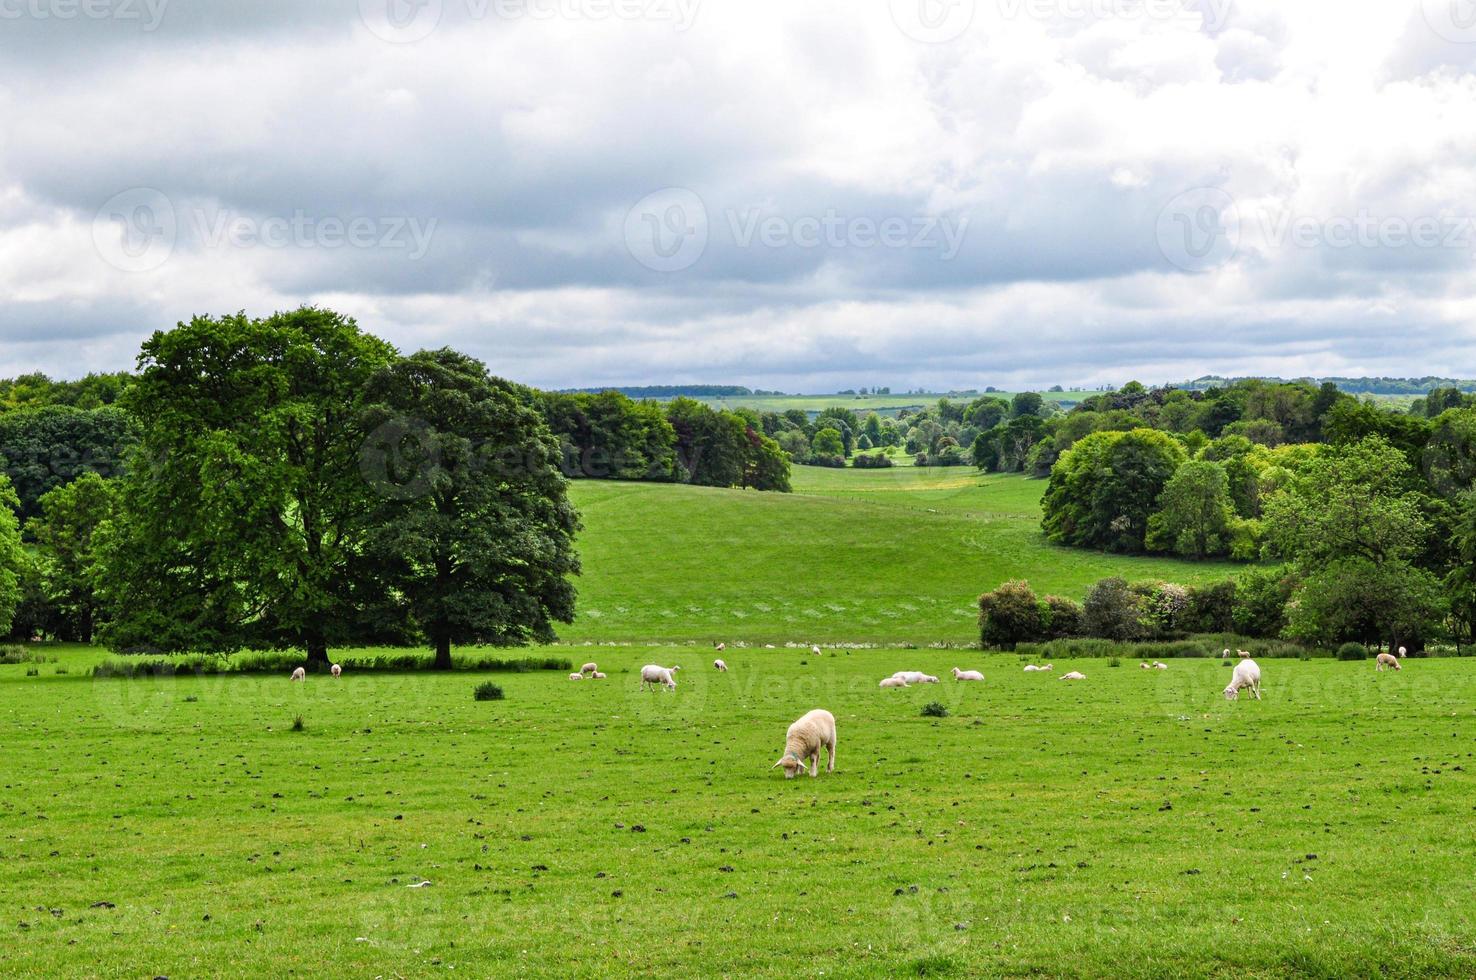 shep herd grazing in the field with green trees and hills in the background n a sunny day photo